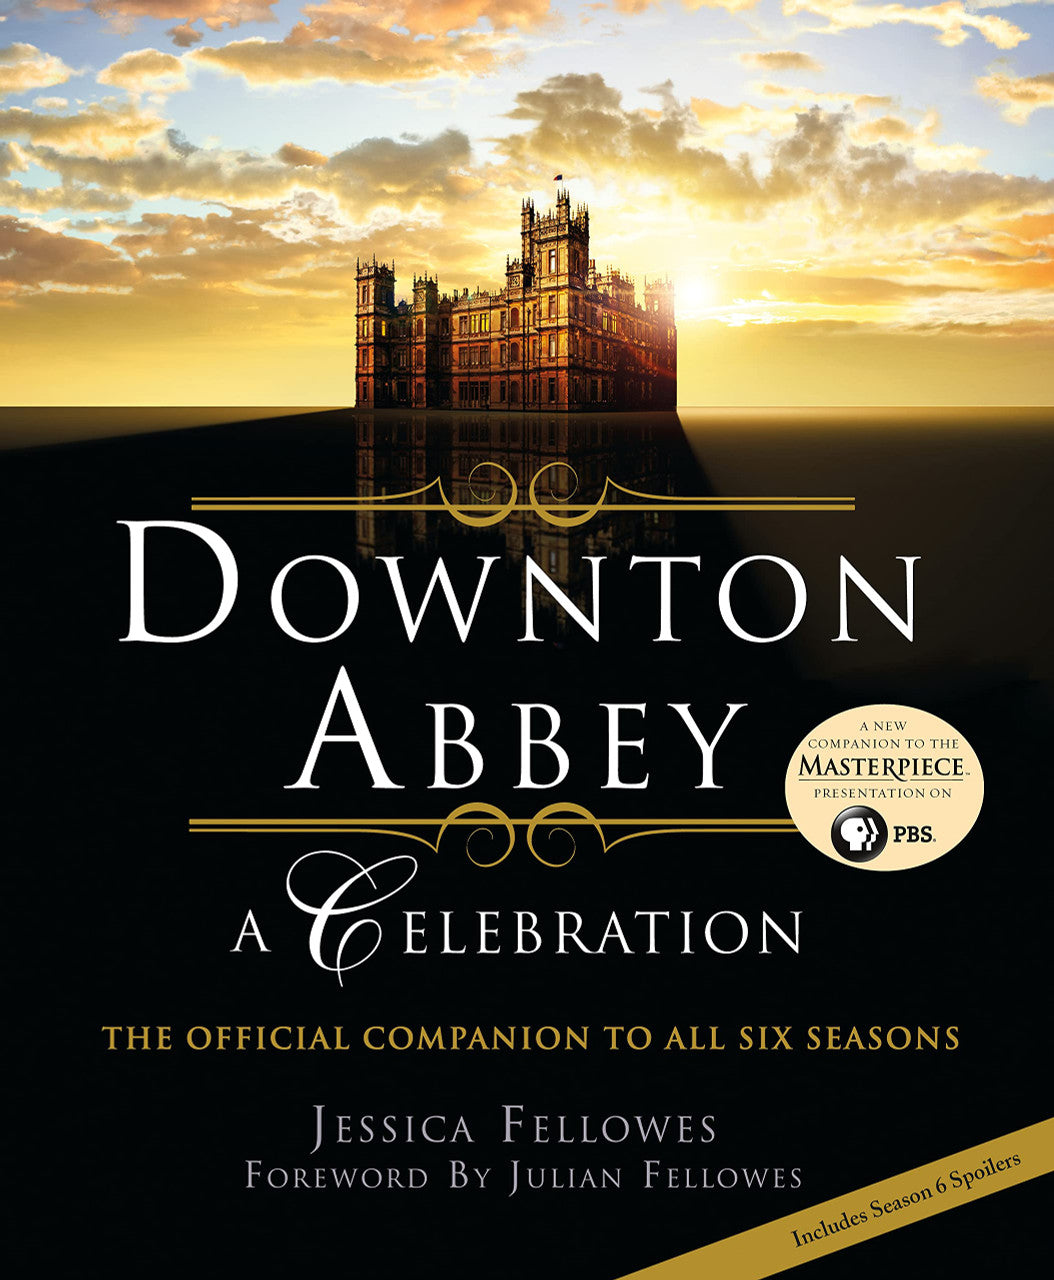 Downton Abbey - A Celebration: The Official Companion to All Six Seasons. Softcover book.